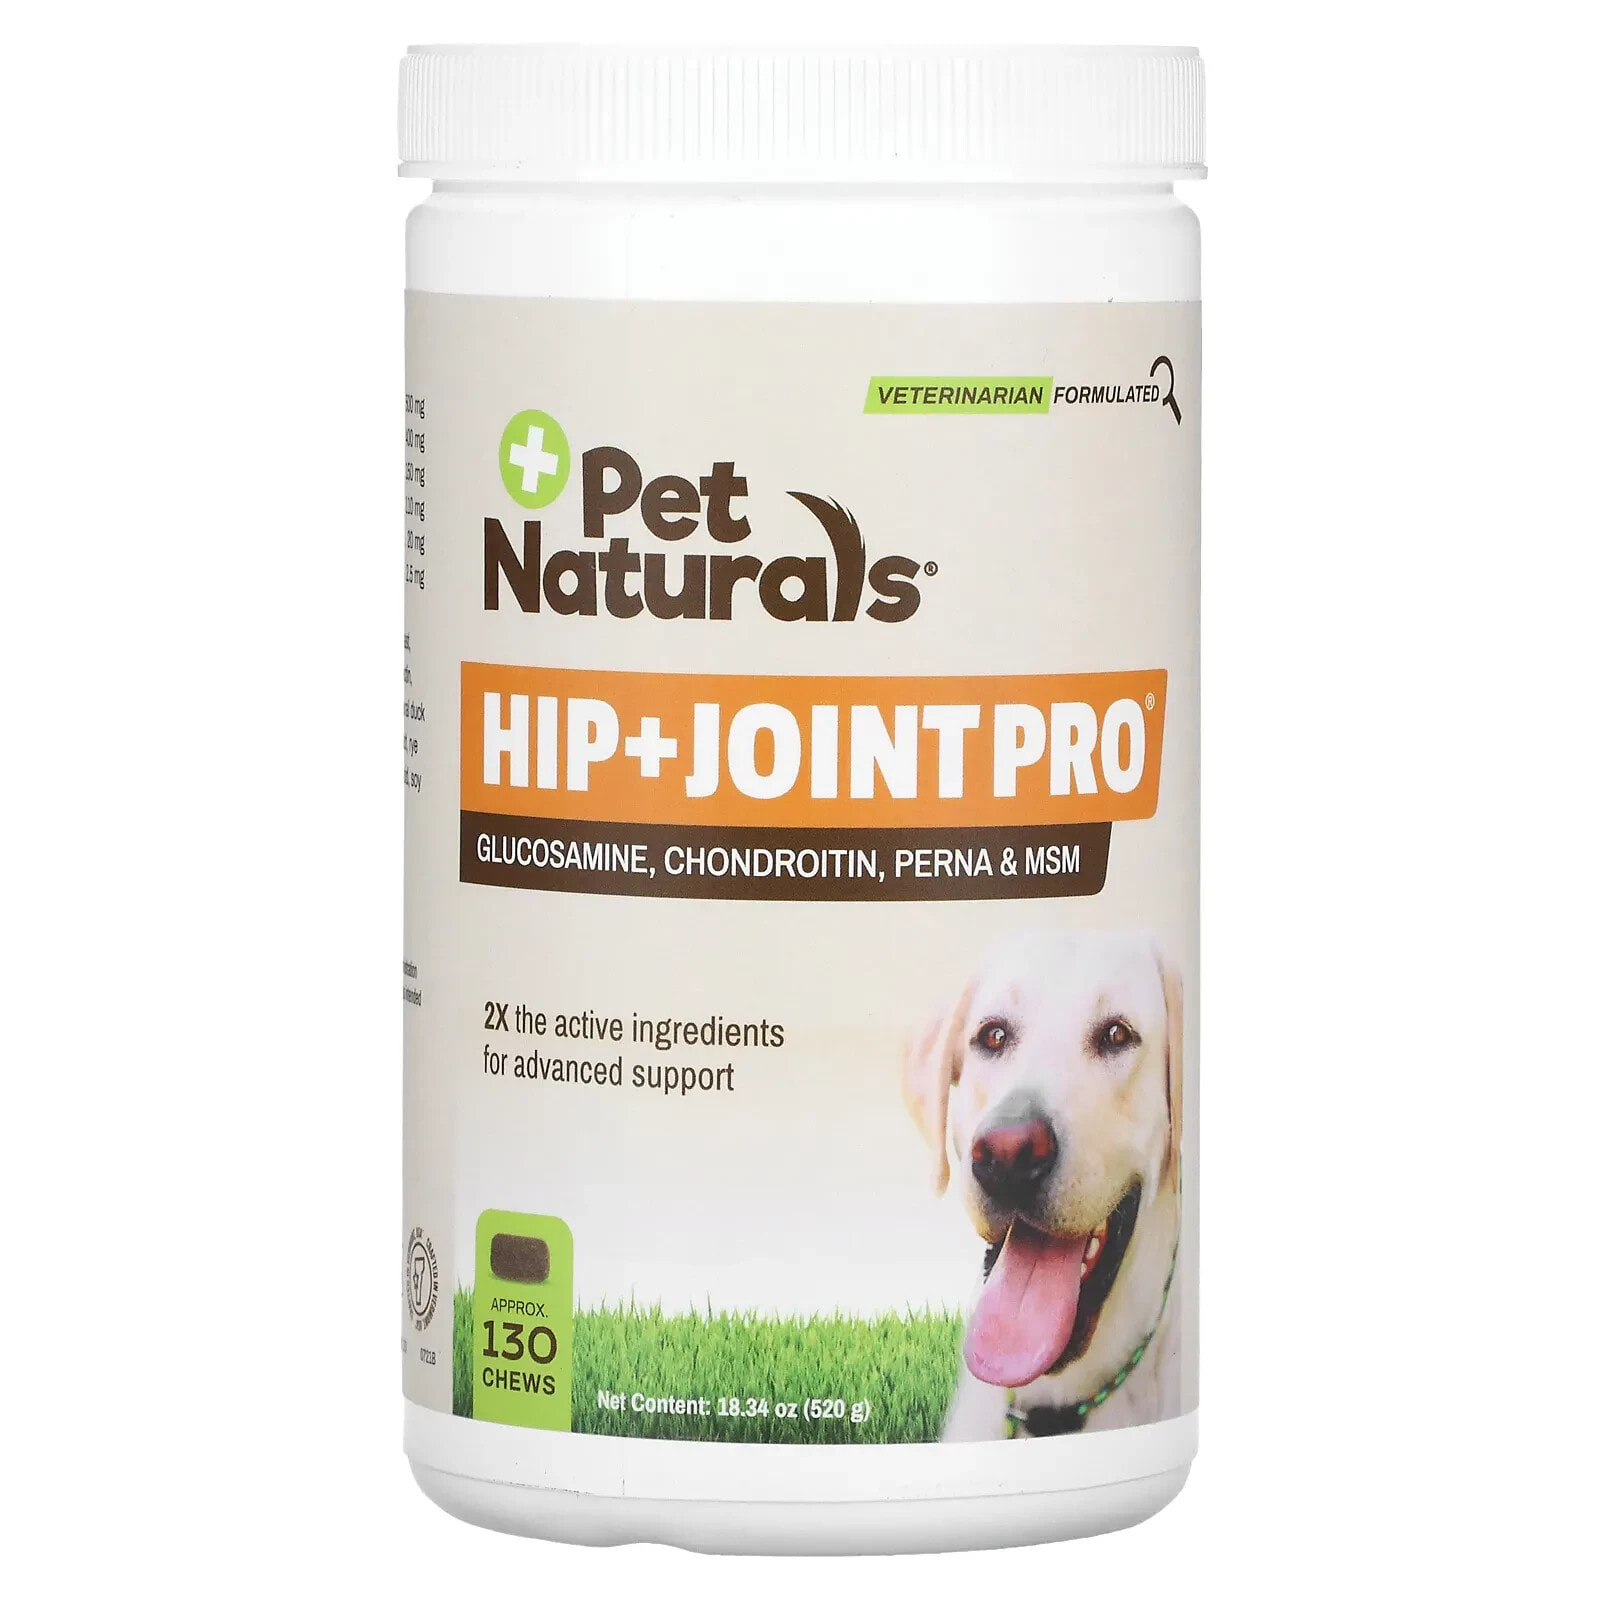 Pet Naturals, Hip + Joint Pro, For Dogs, 130 Chews, 18.34 oz (520 g)